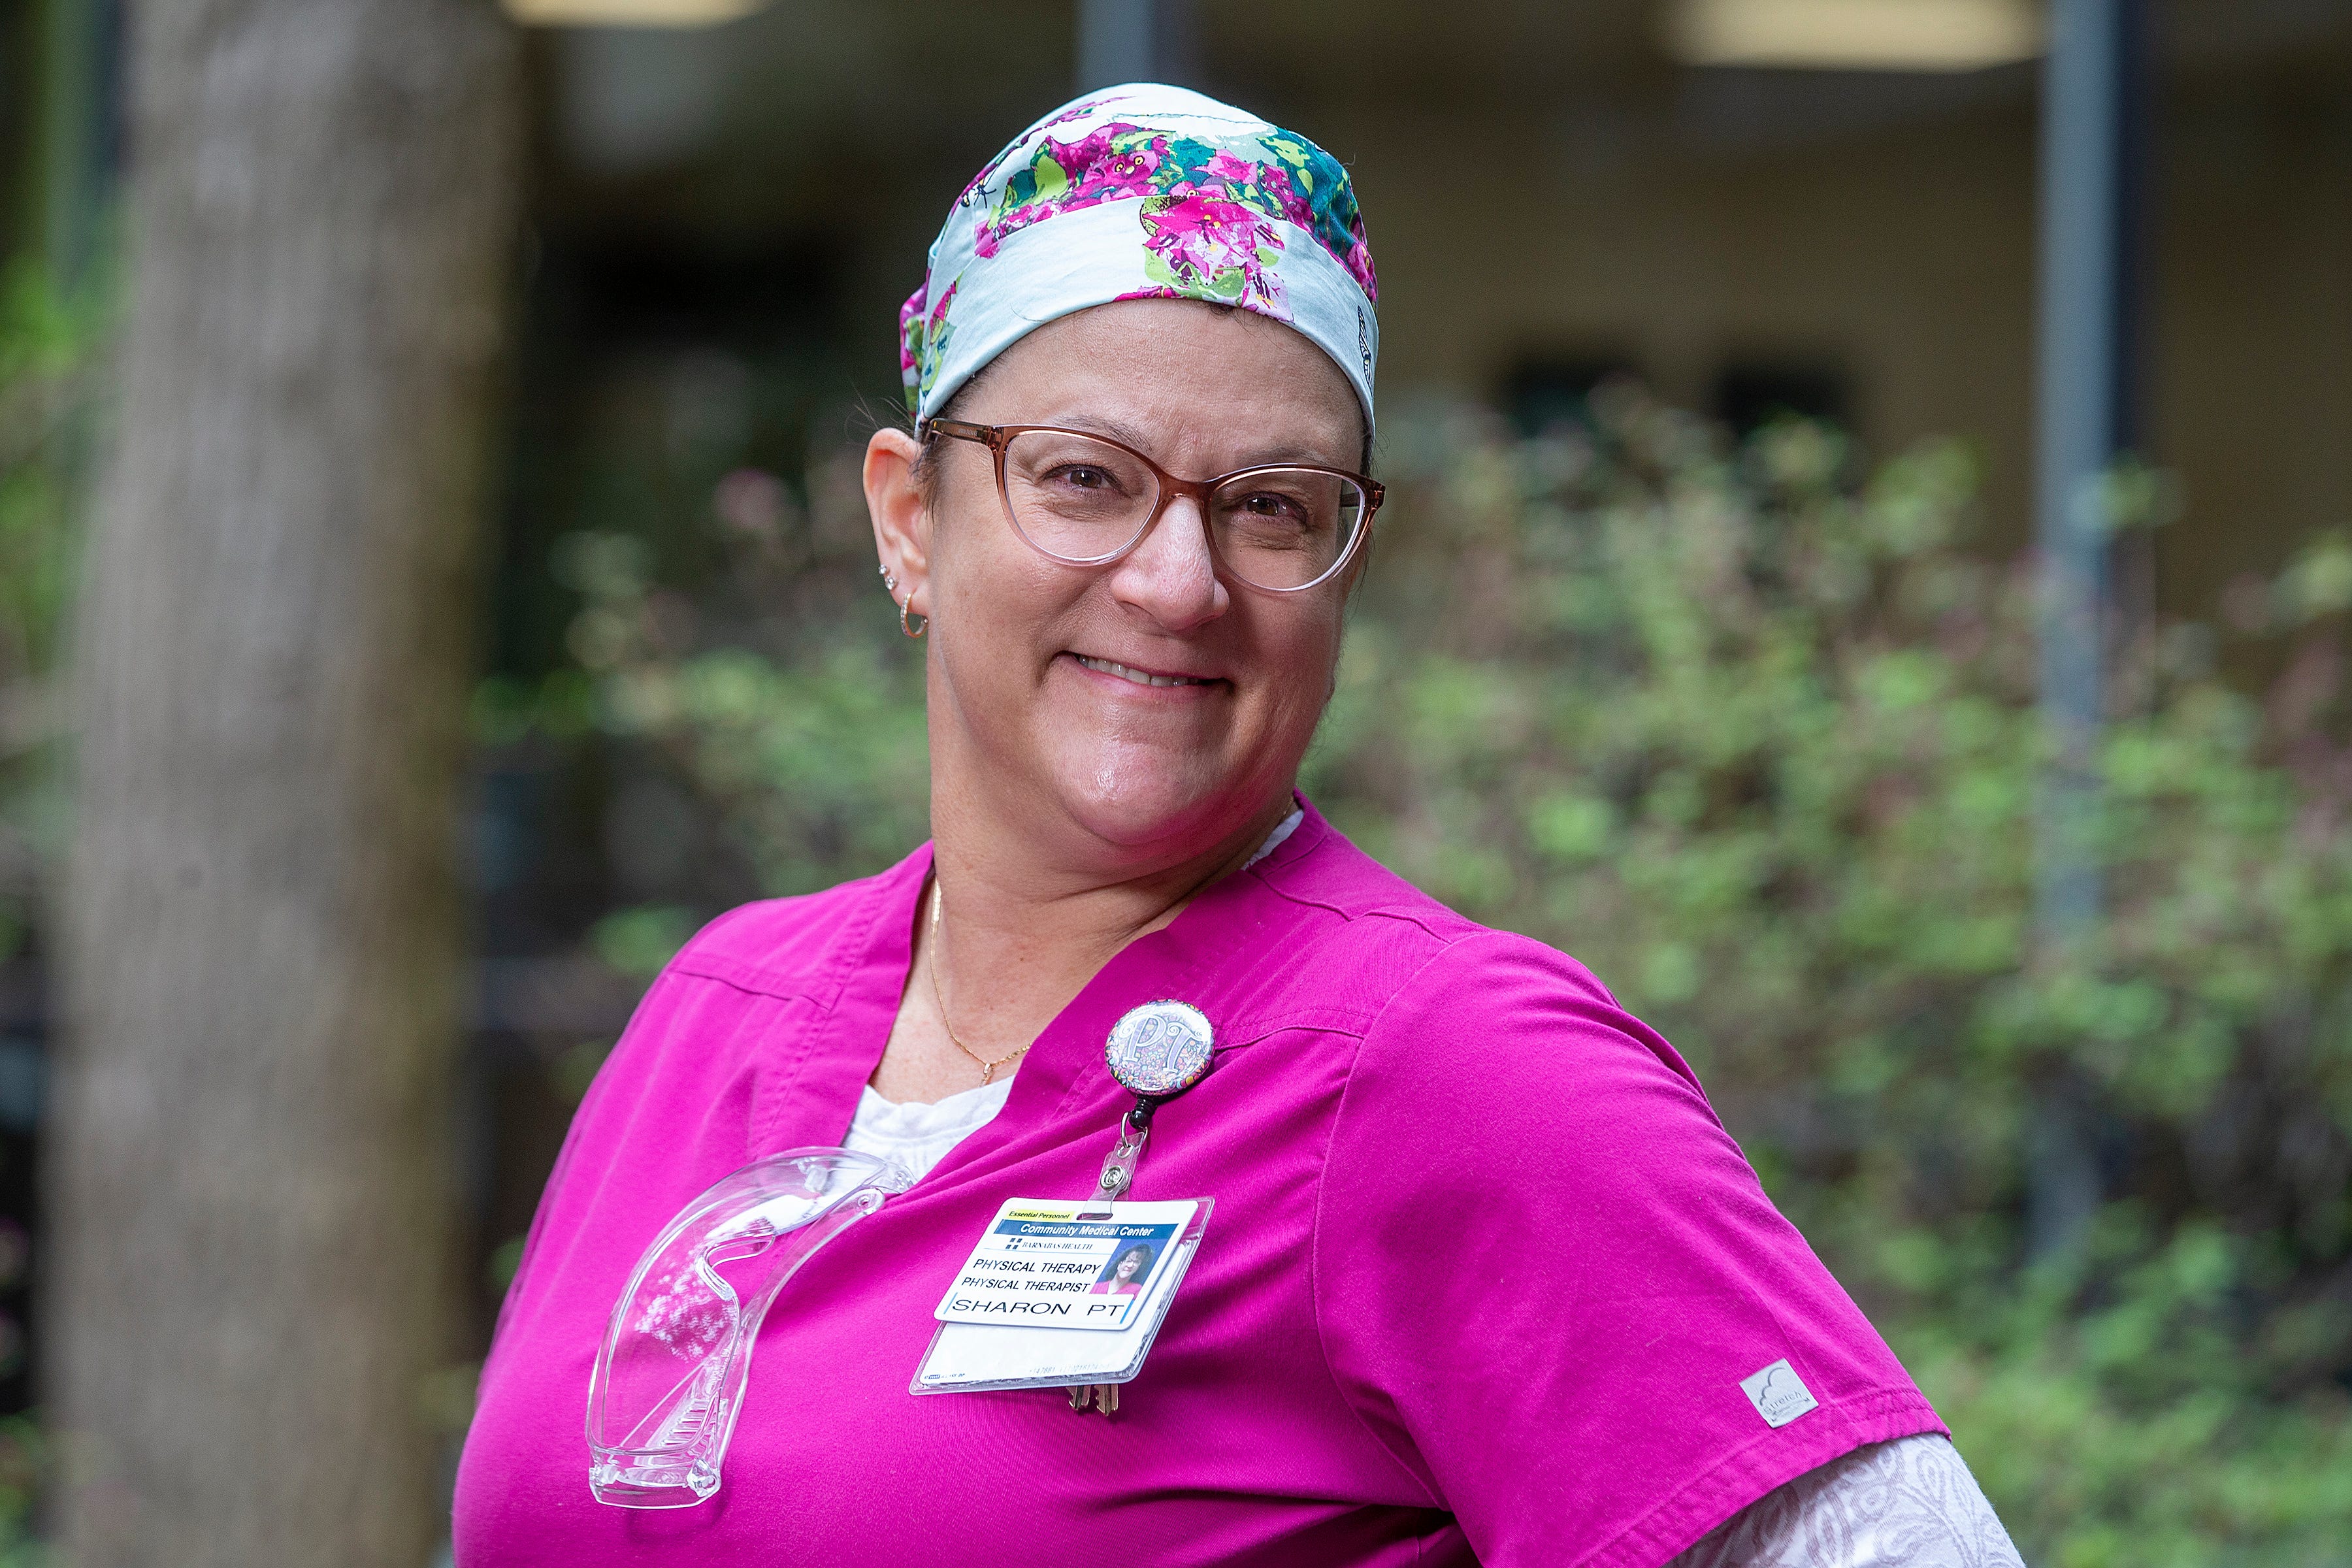 "My director got asked for any volunteers and I appreciated the opportunity to, you know, to help those in need to provide care and love to the sickest of the sick here in the hospital and I didn't hesitate to volunteer."- Sharon Marshall, physical therapist, Community Medical Center in Toms River, NJ Monday, April 20, 2020.